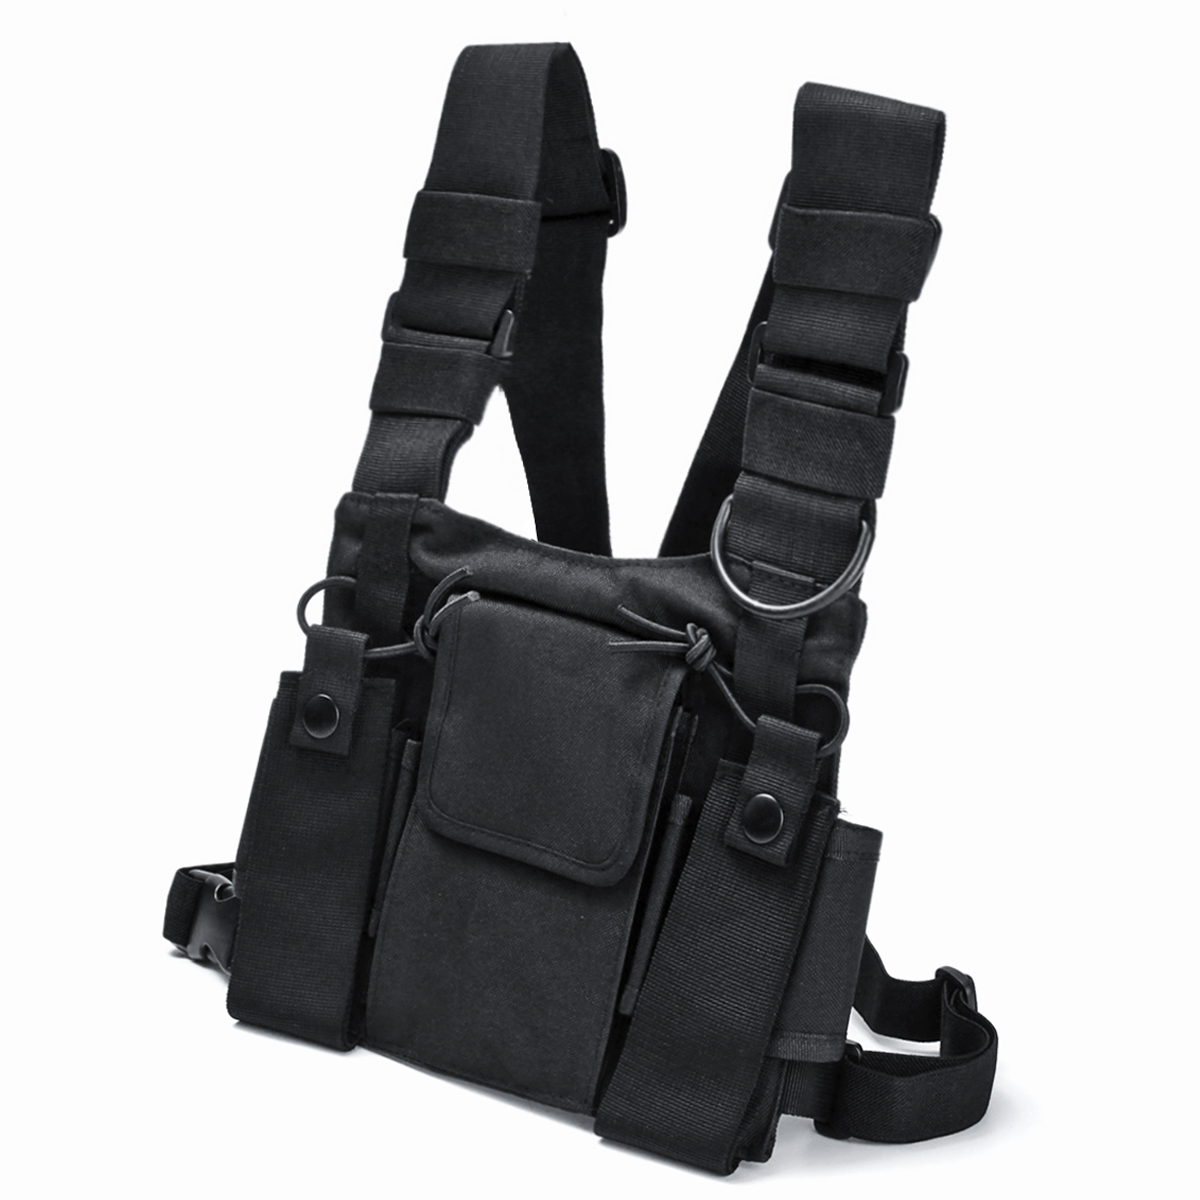 Find Chest 3 Pocket Harness Nylon Bag Pack Backpack Holster for Radio Walkie Talkie Two Way Radio for Sale on Gipsybee.com with cryptocurrencies